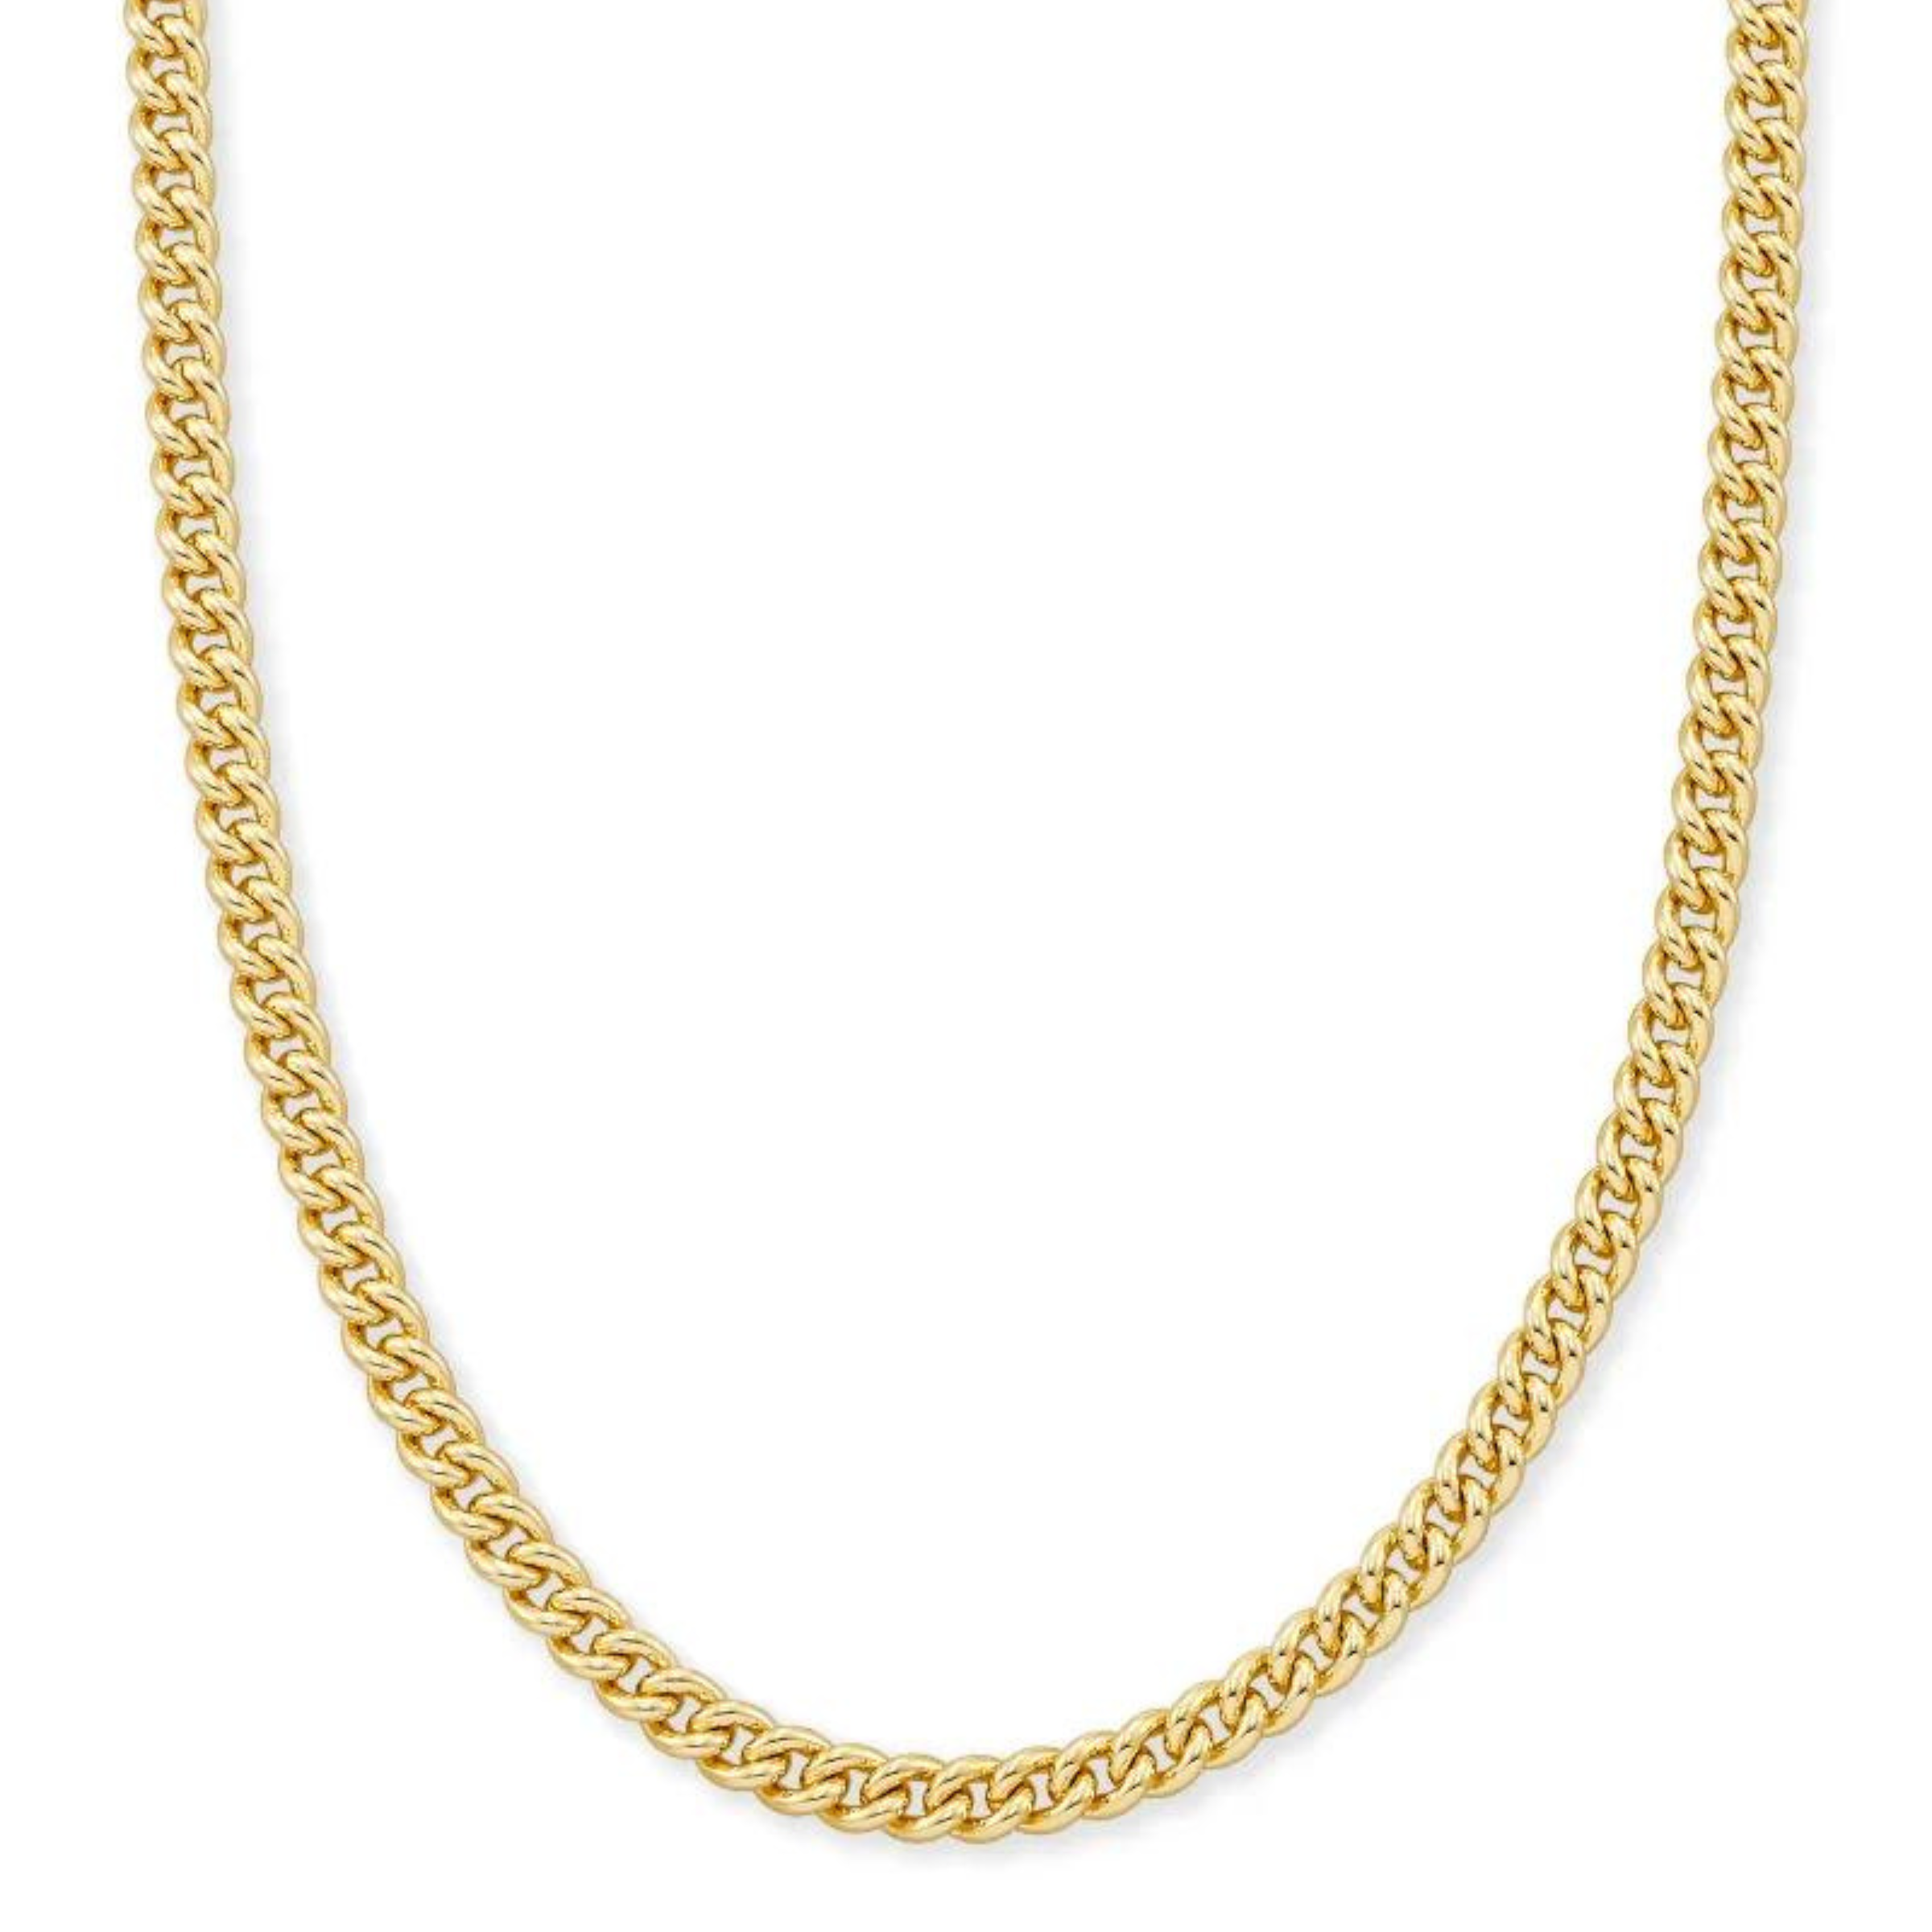 Gold chain necklace pictured on a white background. 